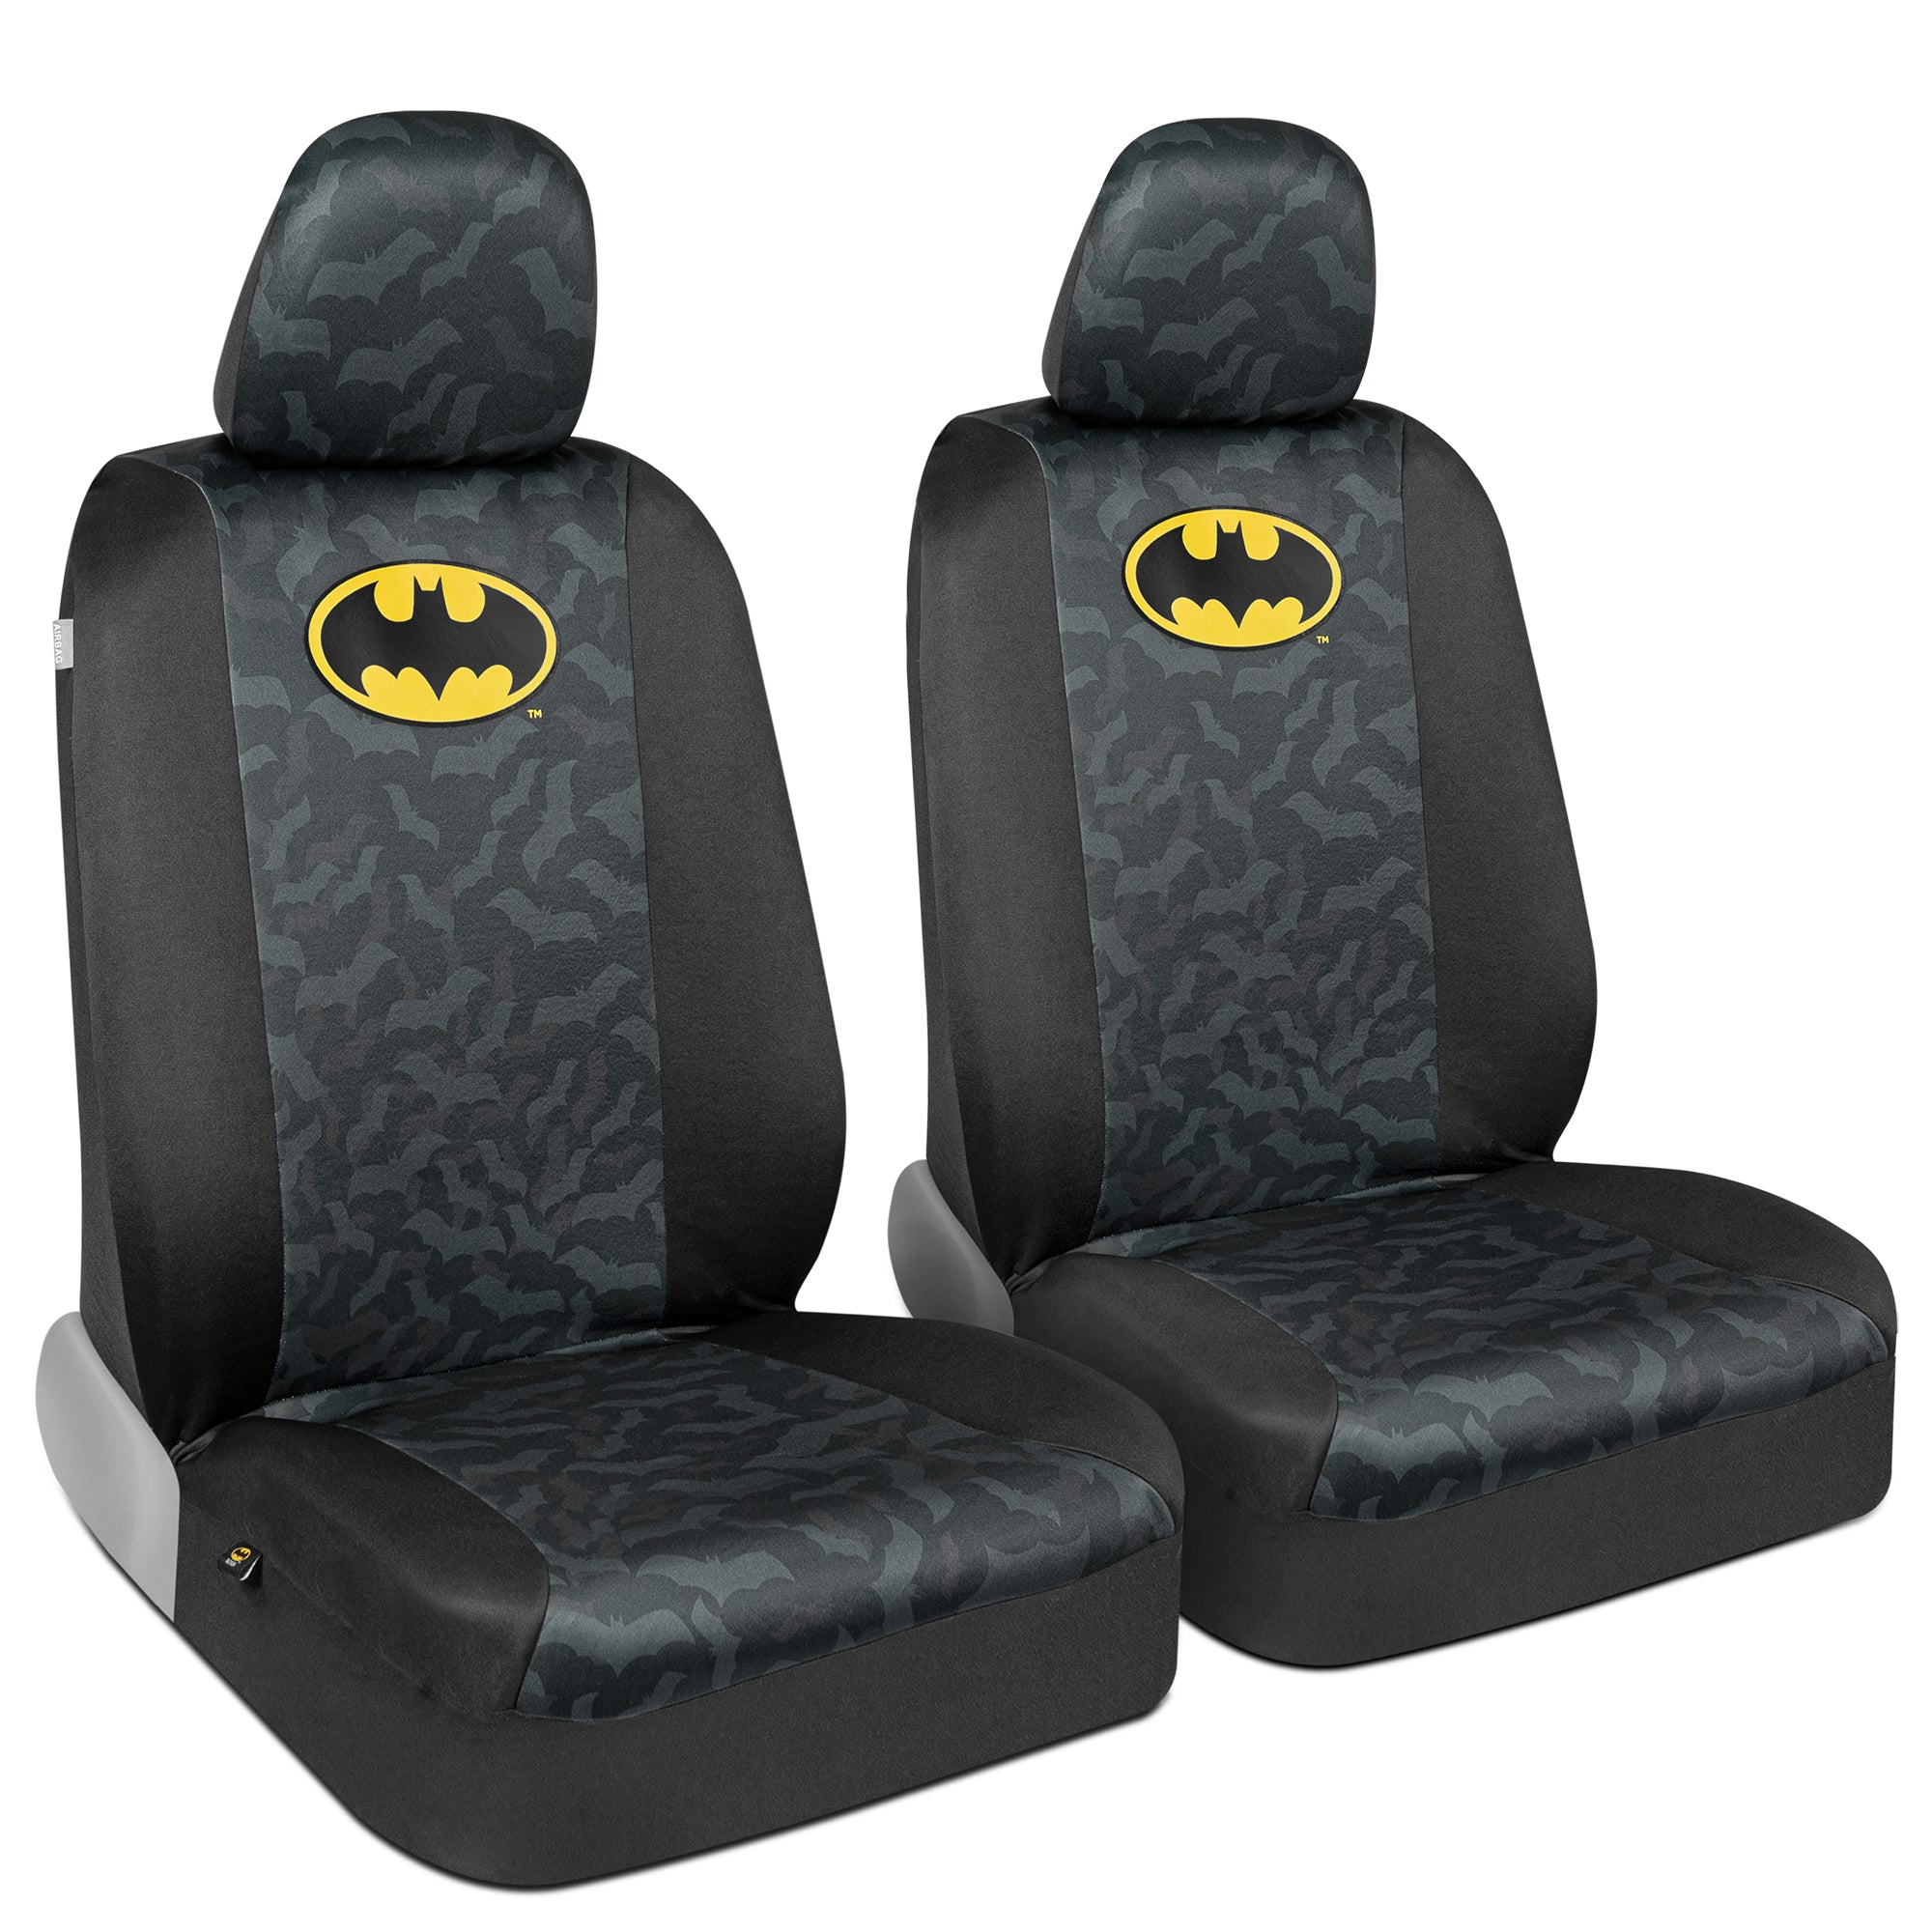 Batman Car Seat Covers for Front Seats with Matching Seat Belt Pads – Officially Licensed Warner Brothers Superhero Auto Accessories Bundle, Made for Car Truck Van and SUV